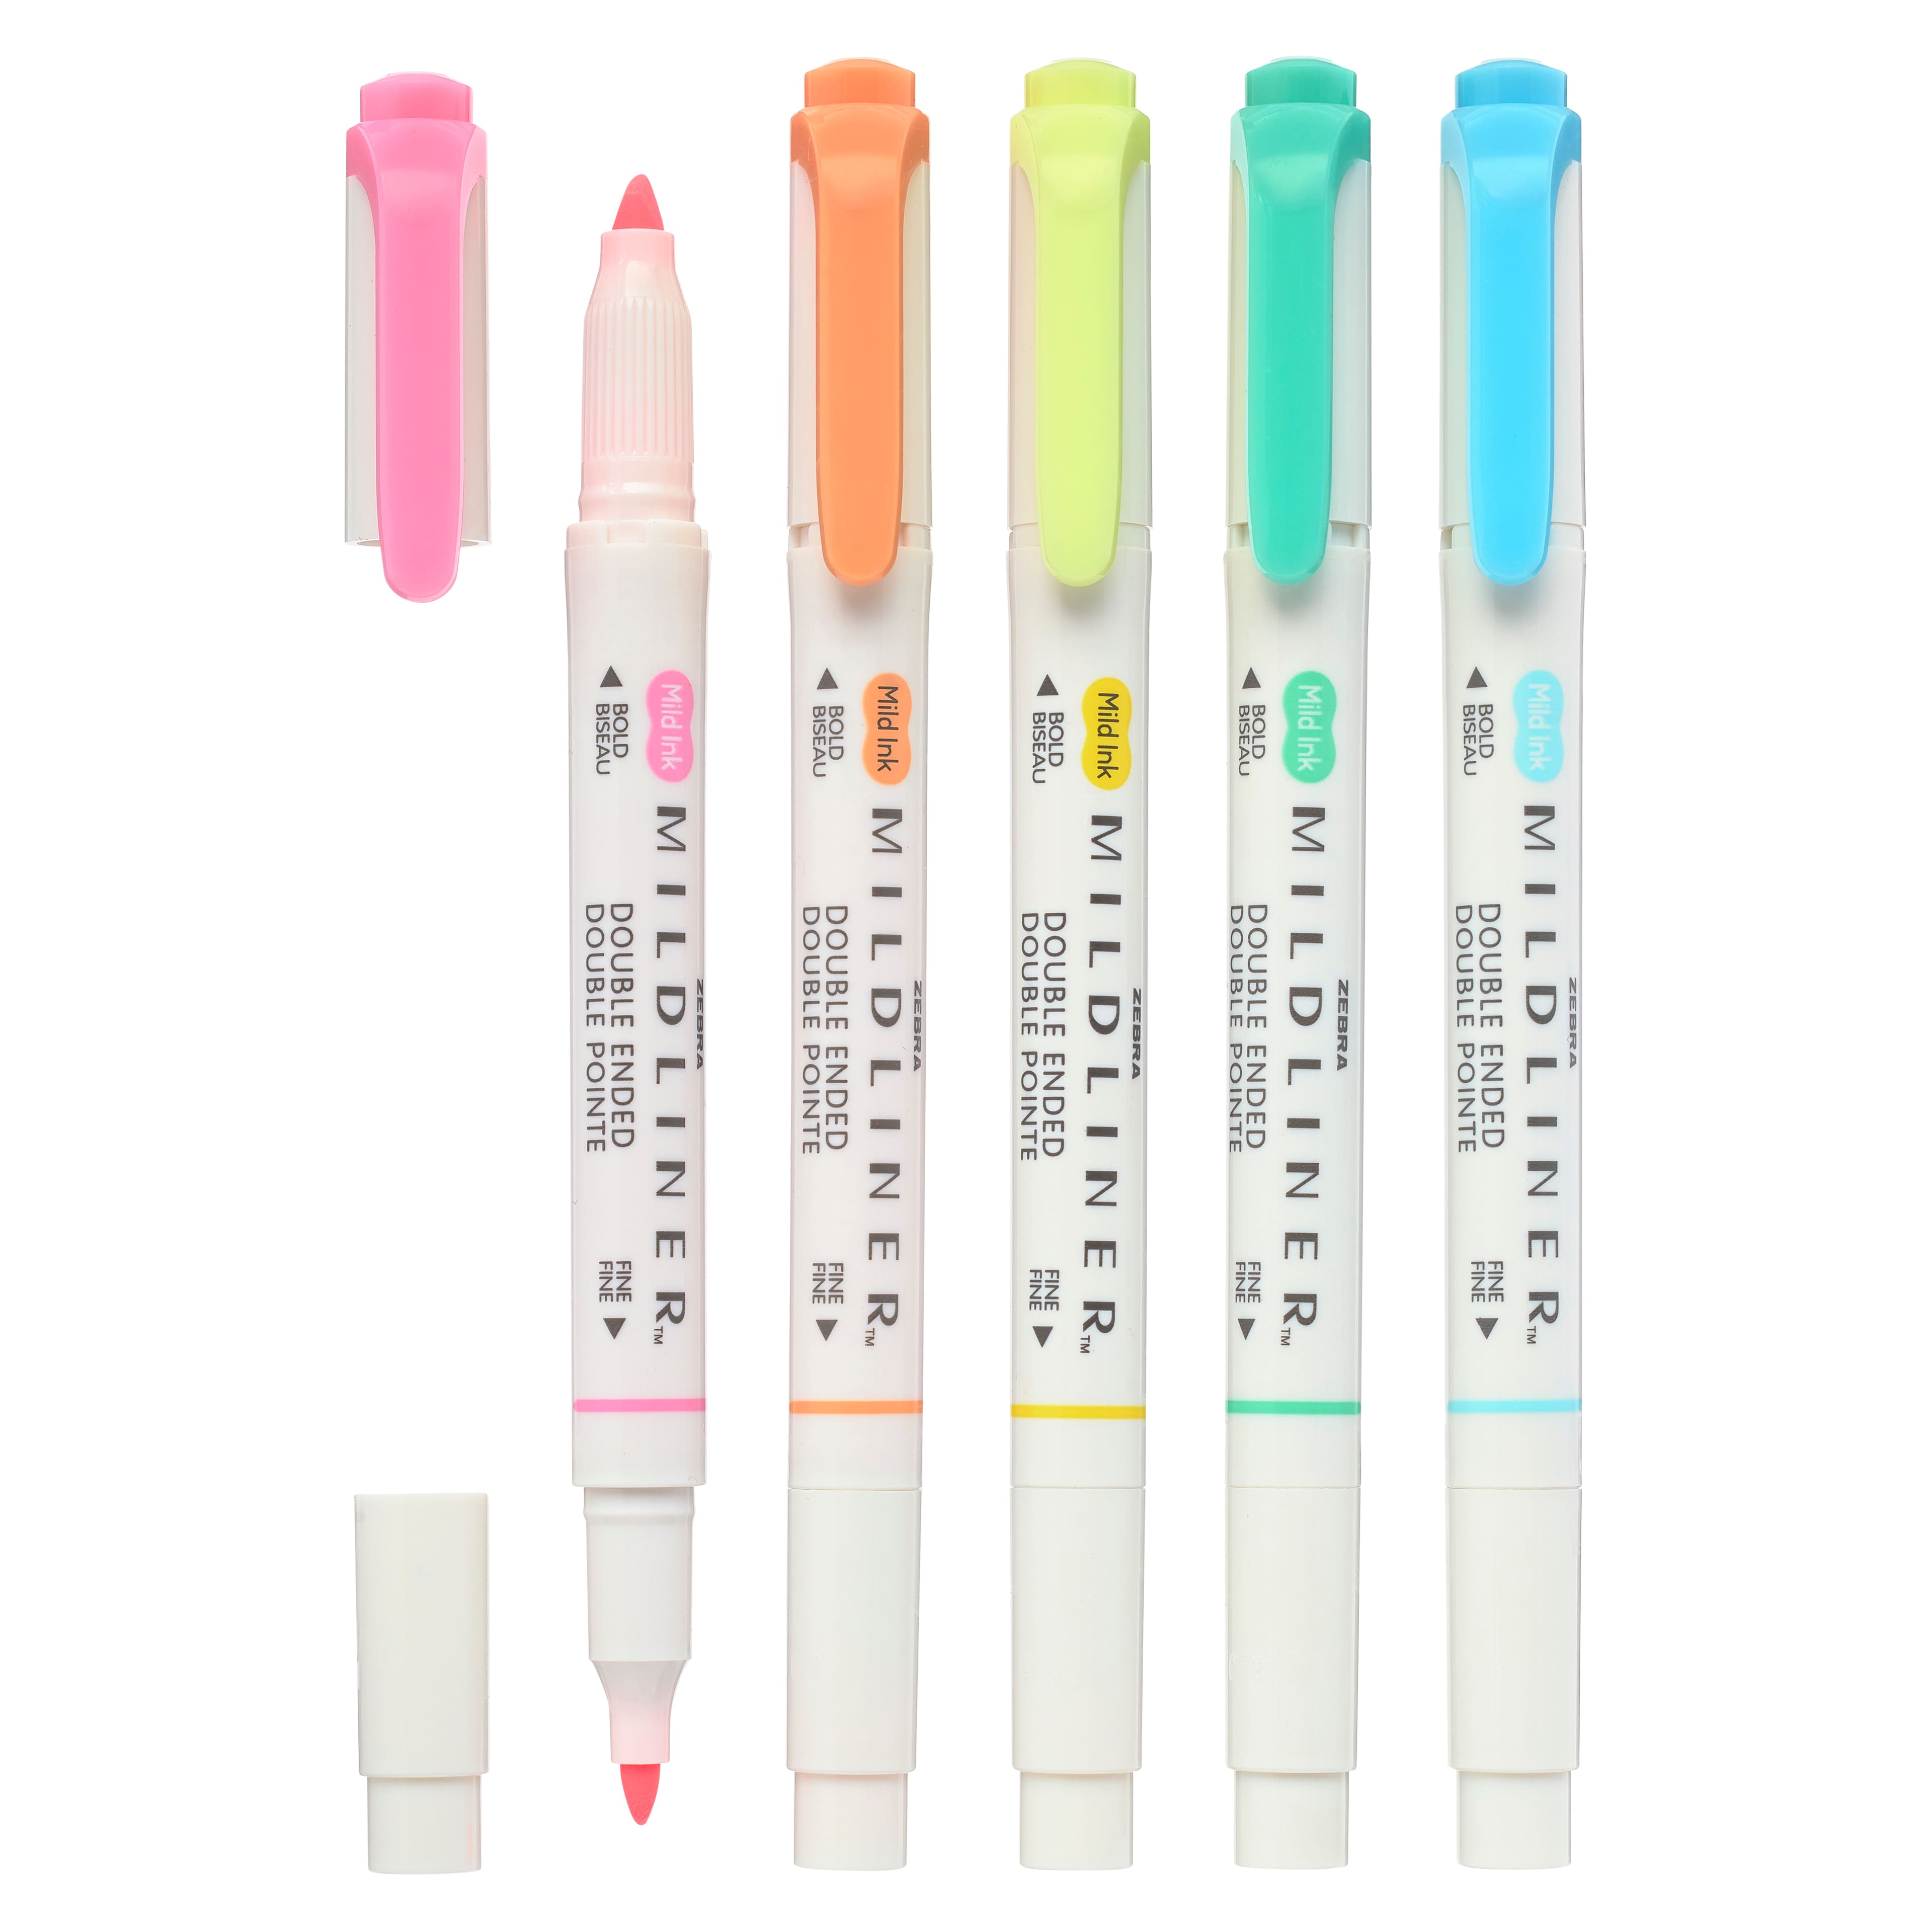 Zebra Mildliner Double Ended Creative Markers - Fluorescent and